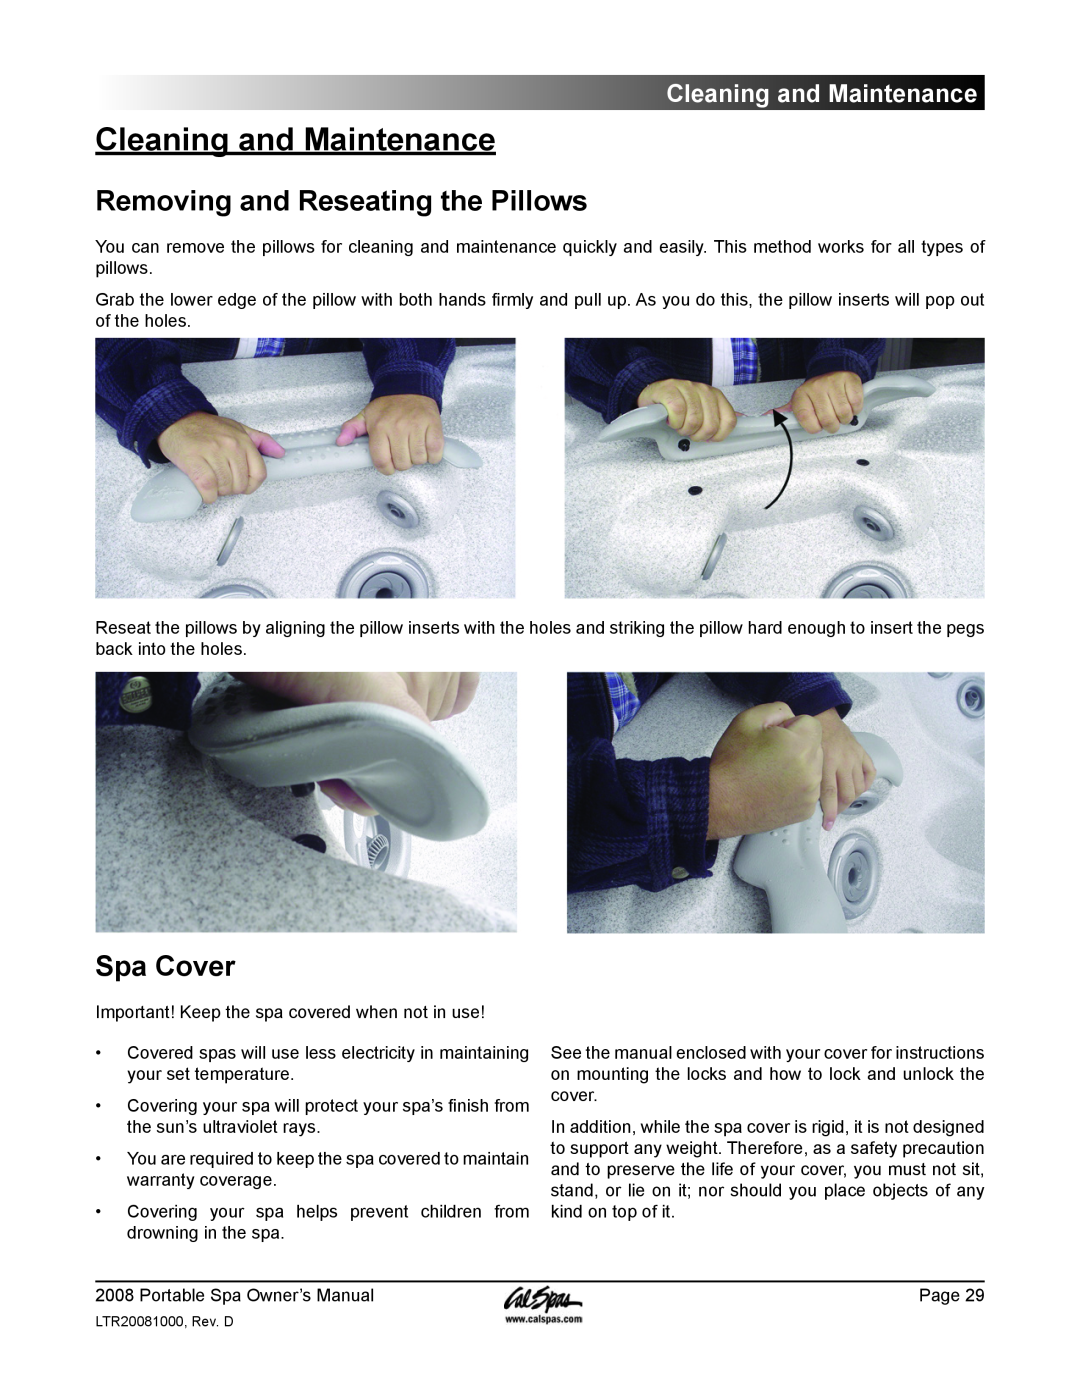 Cal Spas GFCI manual Cleaning and Maintenance, Removing and Reseating the Pillows, Spa Cover 